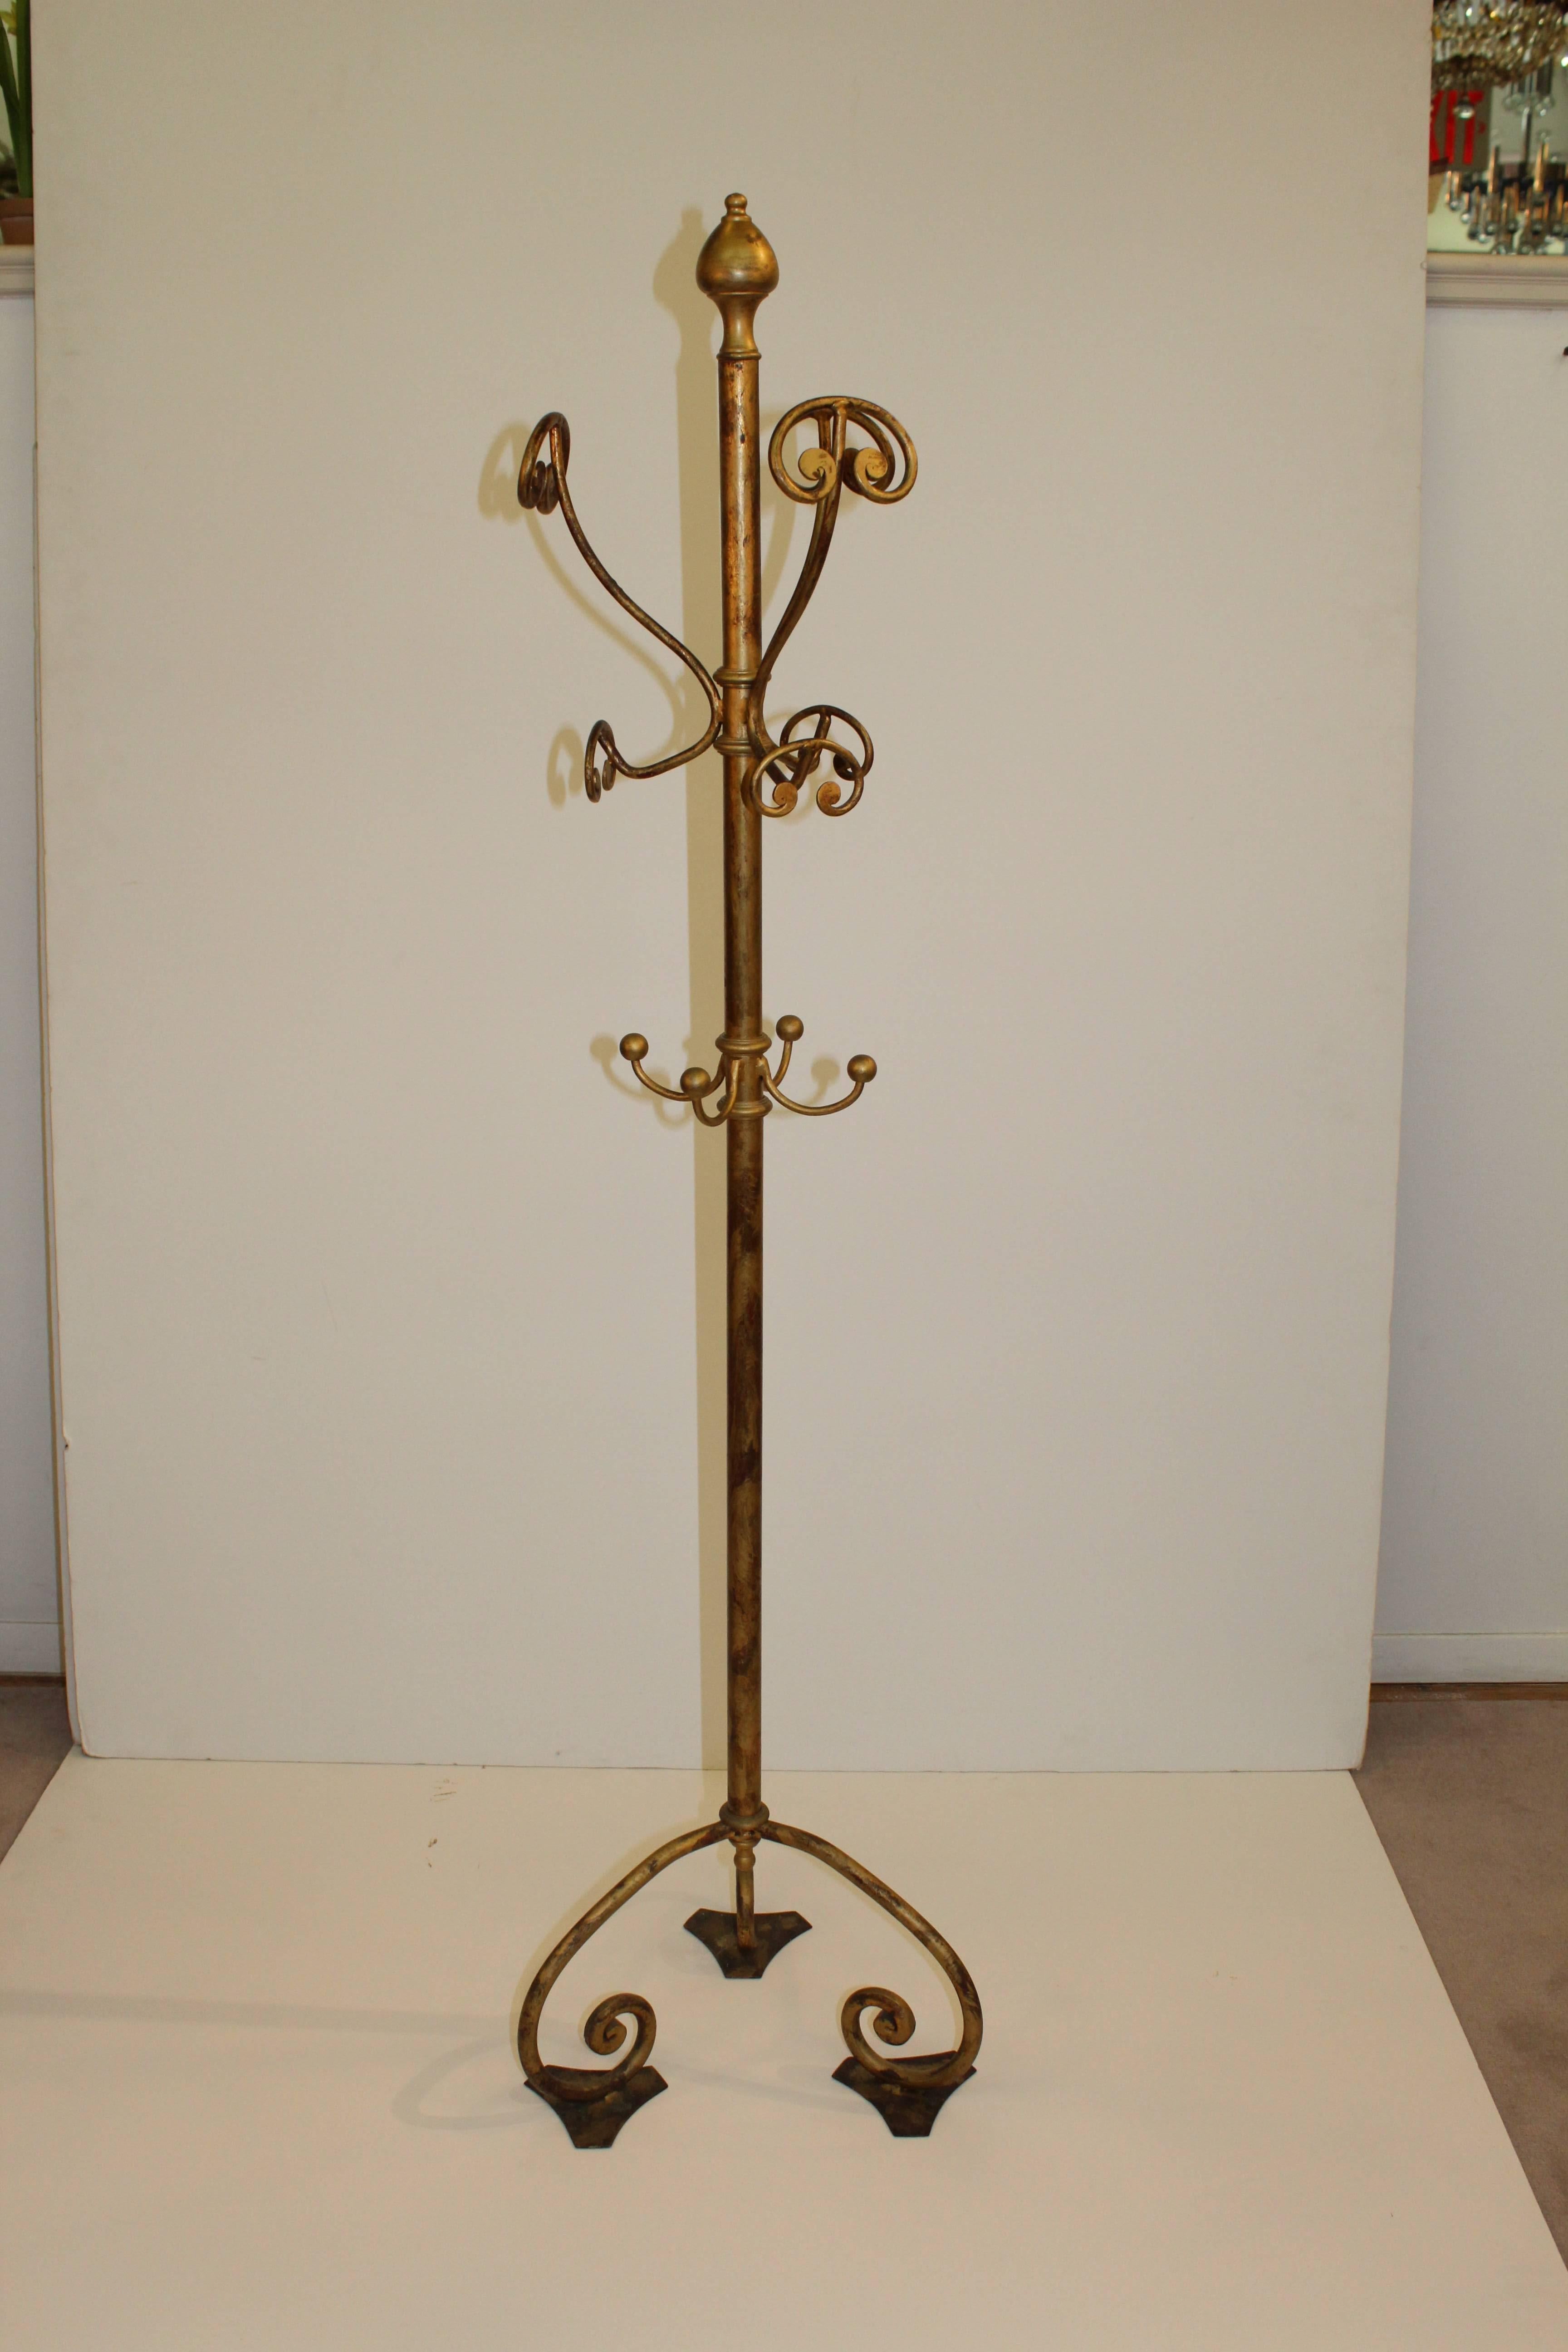 A Florentine diminutive coat rack produced in brass during the 1960s. Features ten beautifully curved hooks. In very good condition consistent with age and use.

110082